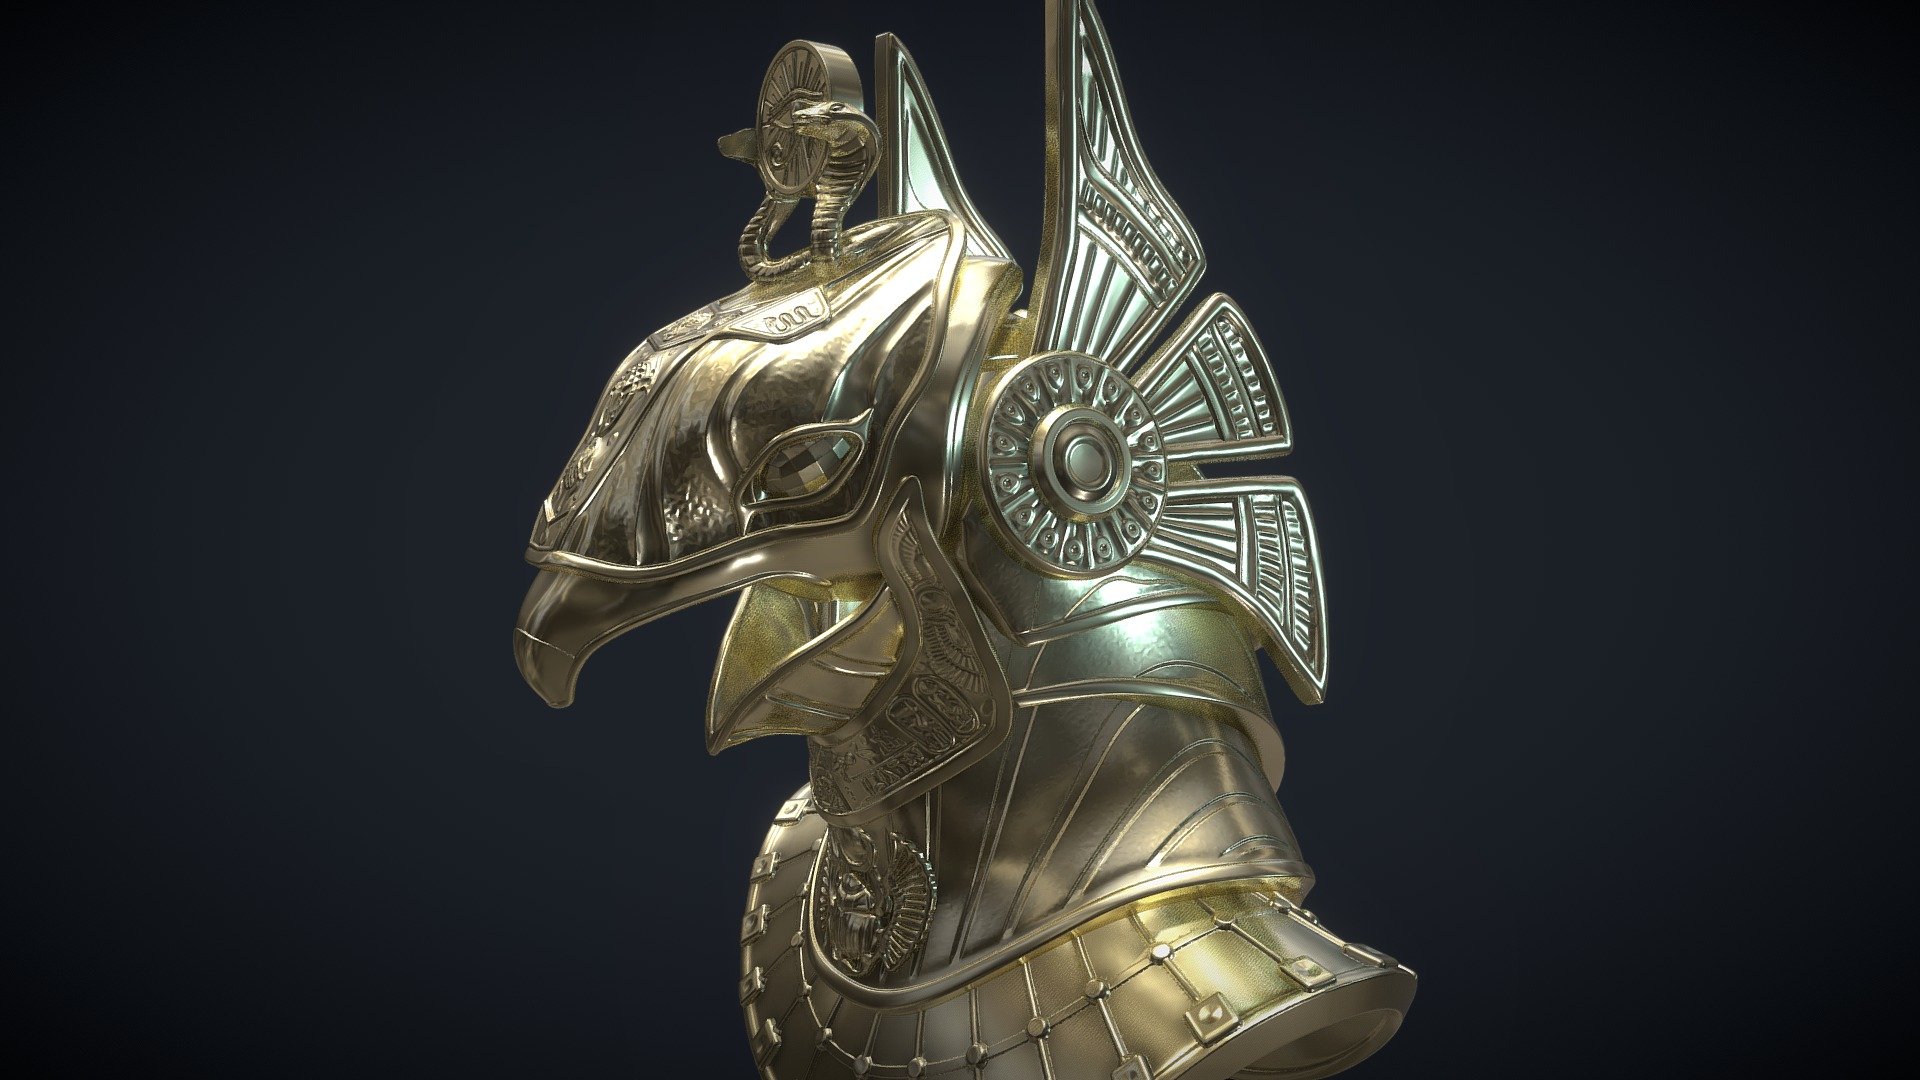 Ornamental helmet concept made for 3D Printing in Zbrush.

Renders: https://www.artstation.com/artwork/3dy9kv

https://www.youtube.com/watch?v=8aUAJj0xgr8

Cuts and joints ready.

Extra stand added.

Let me know if you have any requests.

Enjoy! - Horus helmet - 3D printing - Buy Royalty Free 3D model by Omassyx 3d model